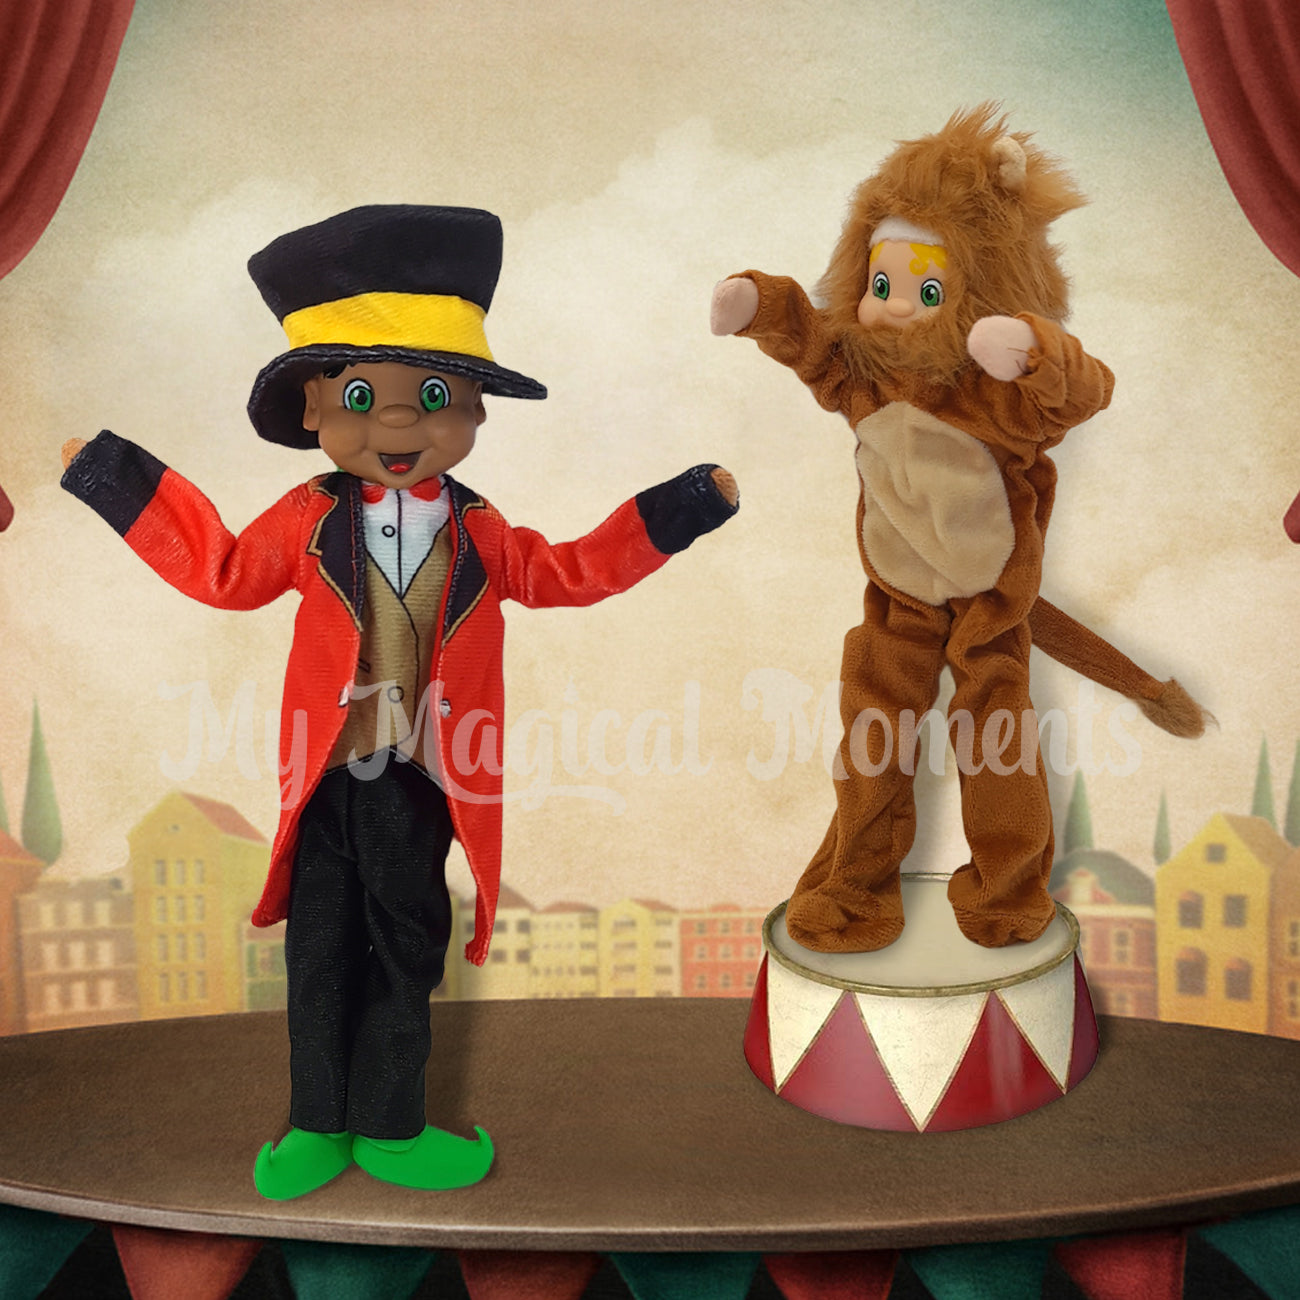 Elf dressed as a ringmaster and another elf is wearing a lion costume